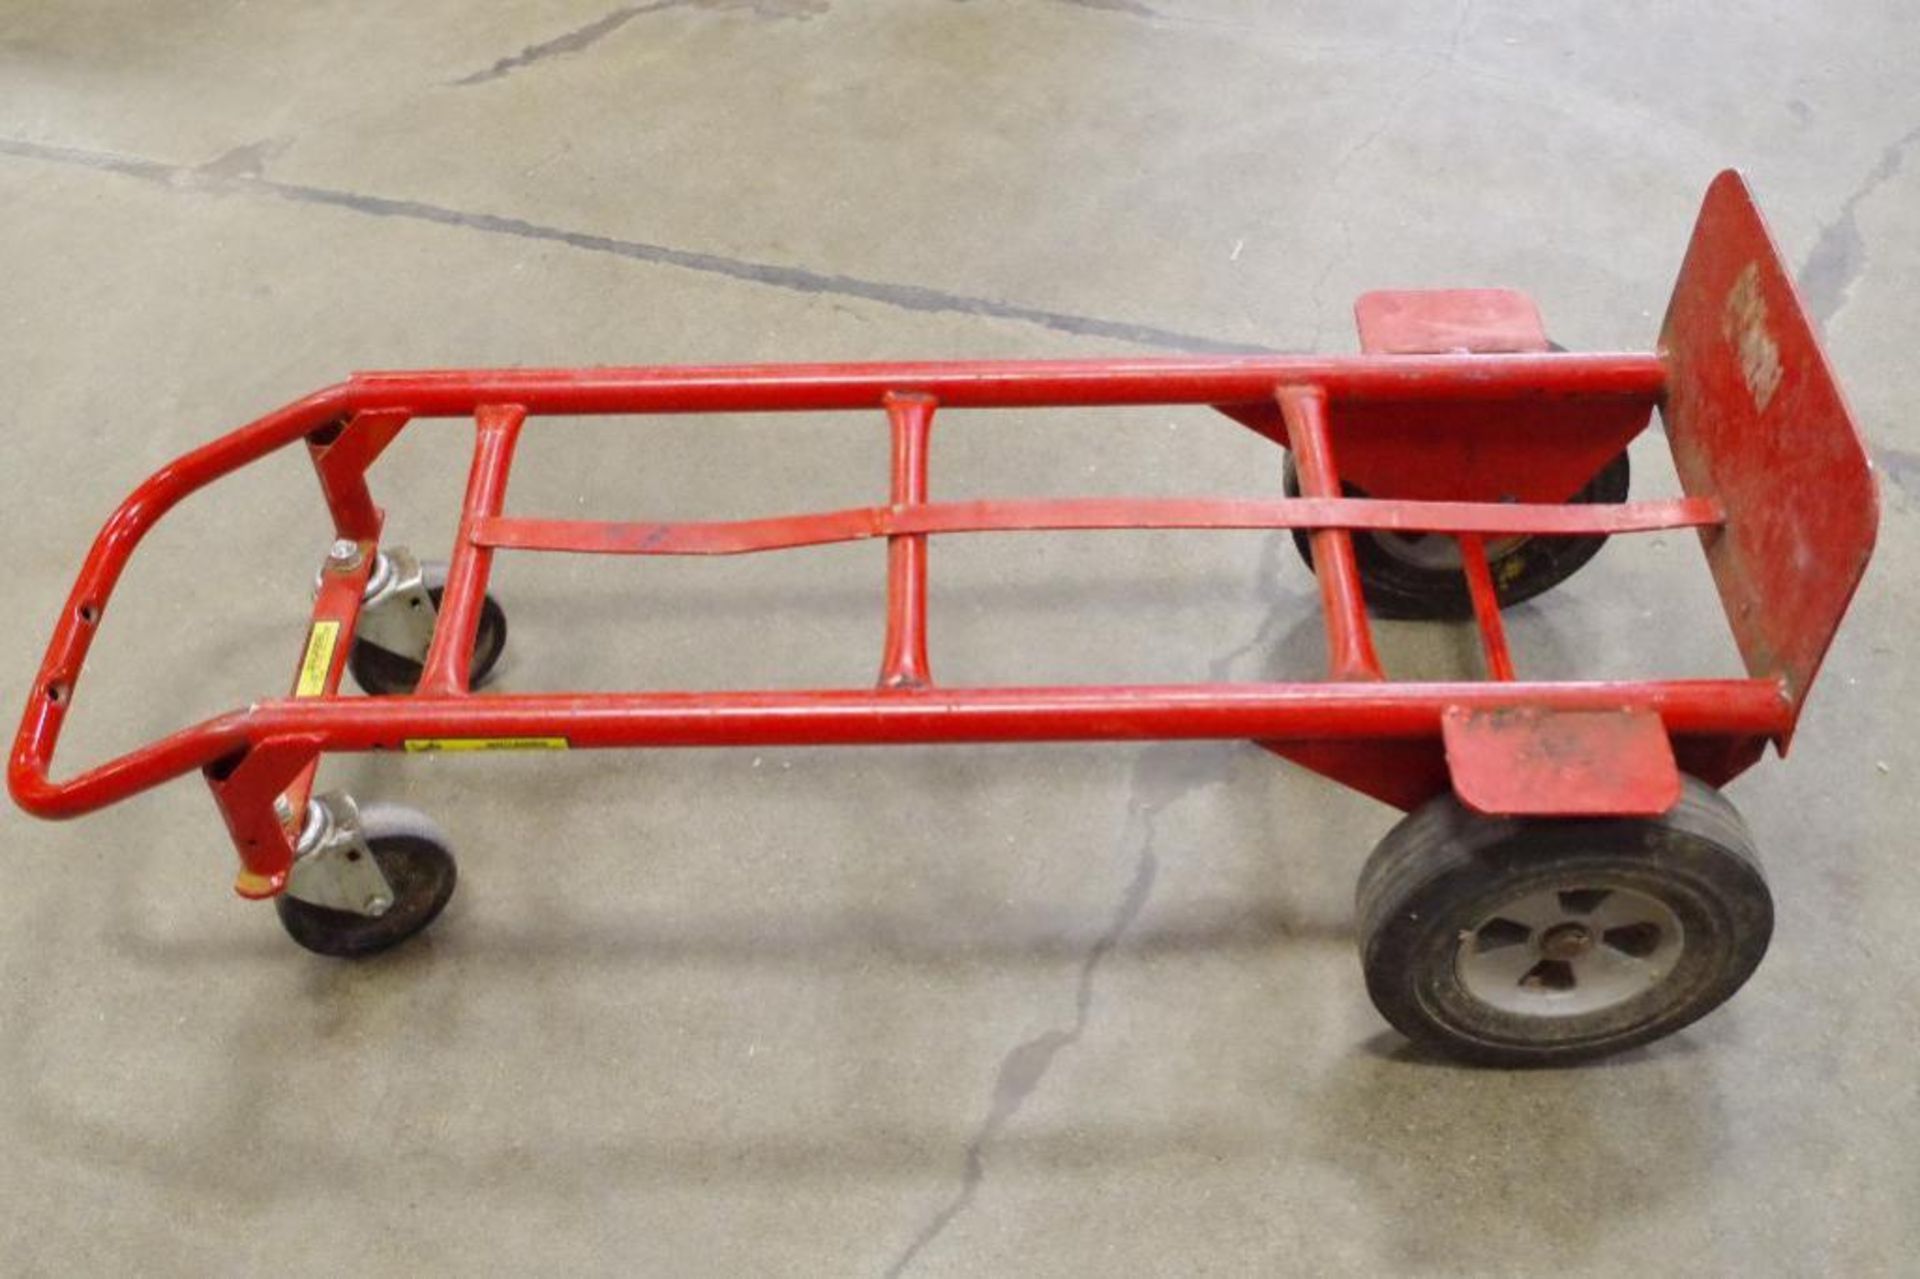 MILWAUKEE Red Convertible Hand Truck 600-lb. Capacity M/N 47180 - Image 3 of 3